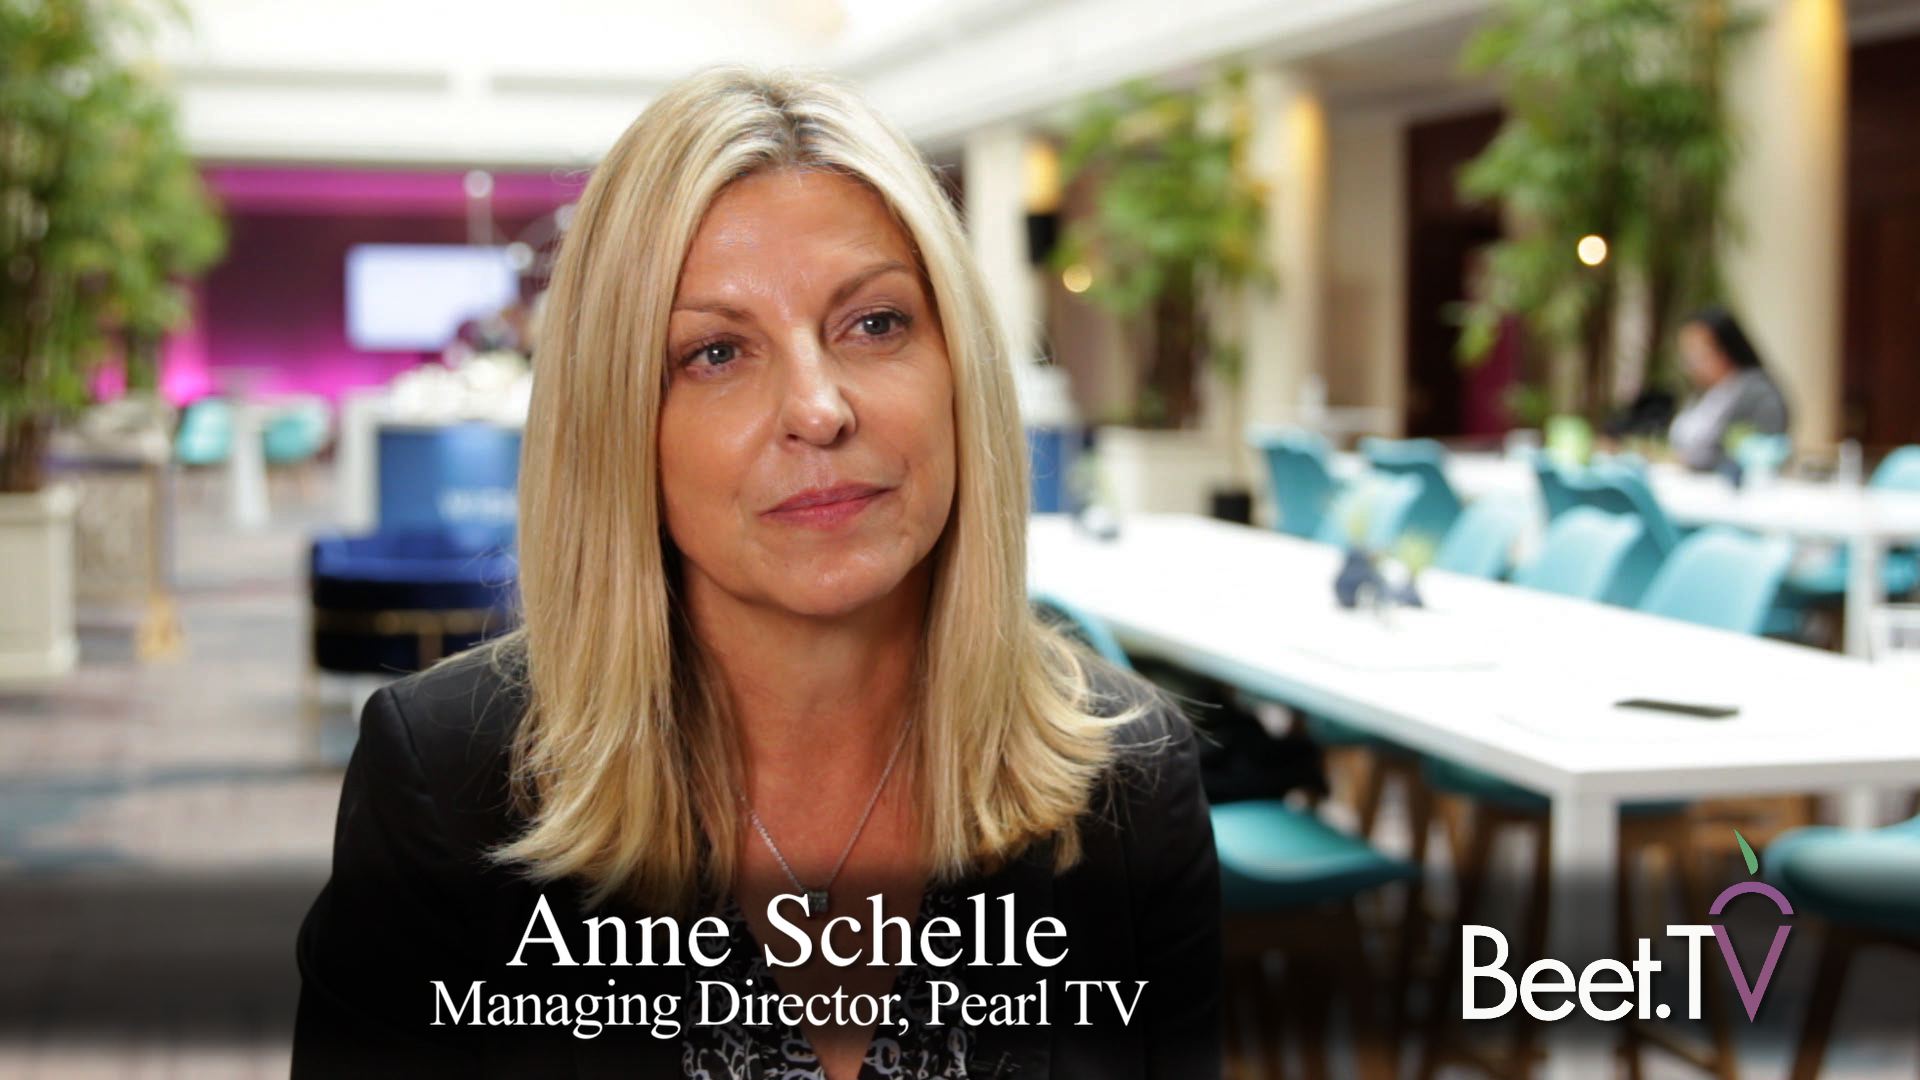 With FCC Approval, ATSC 3.0 Is ‘Whole New World’ For Broadcasters, Pearl TV’s Schelle